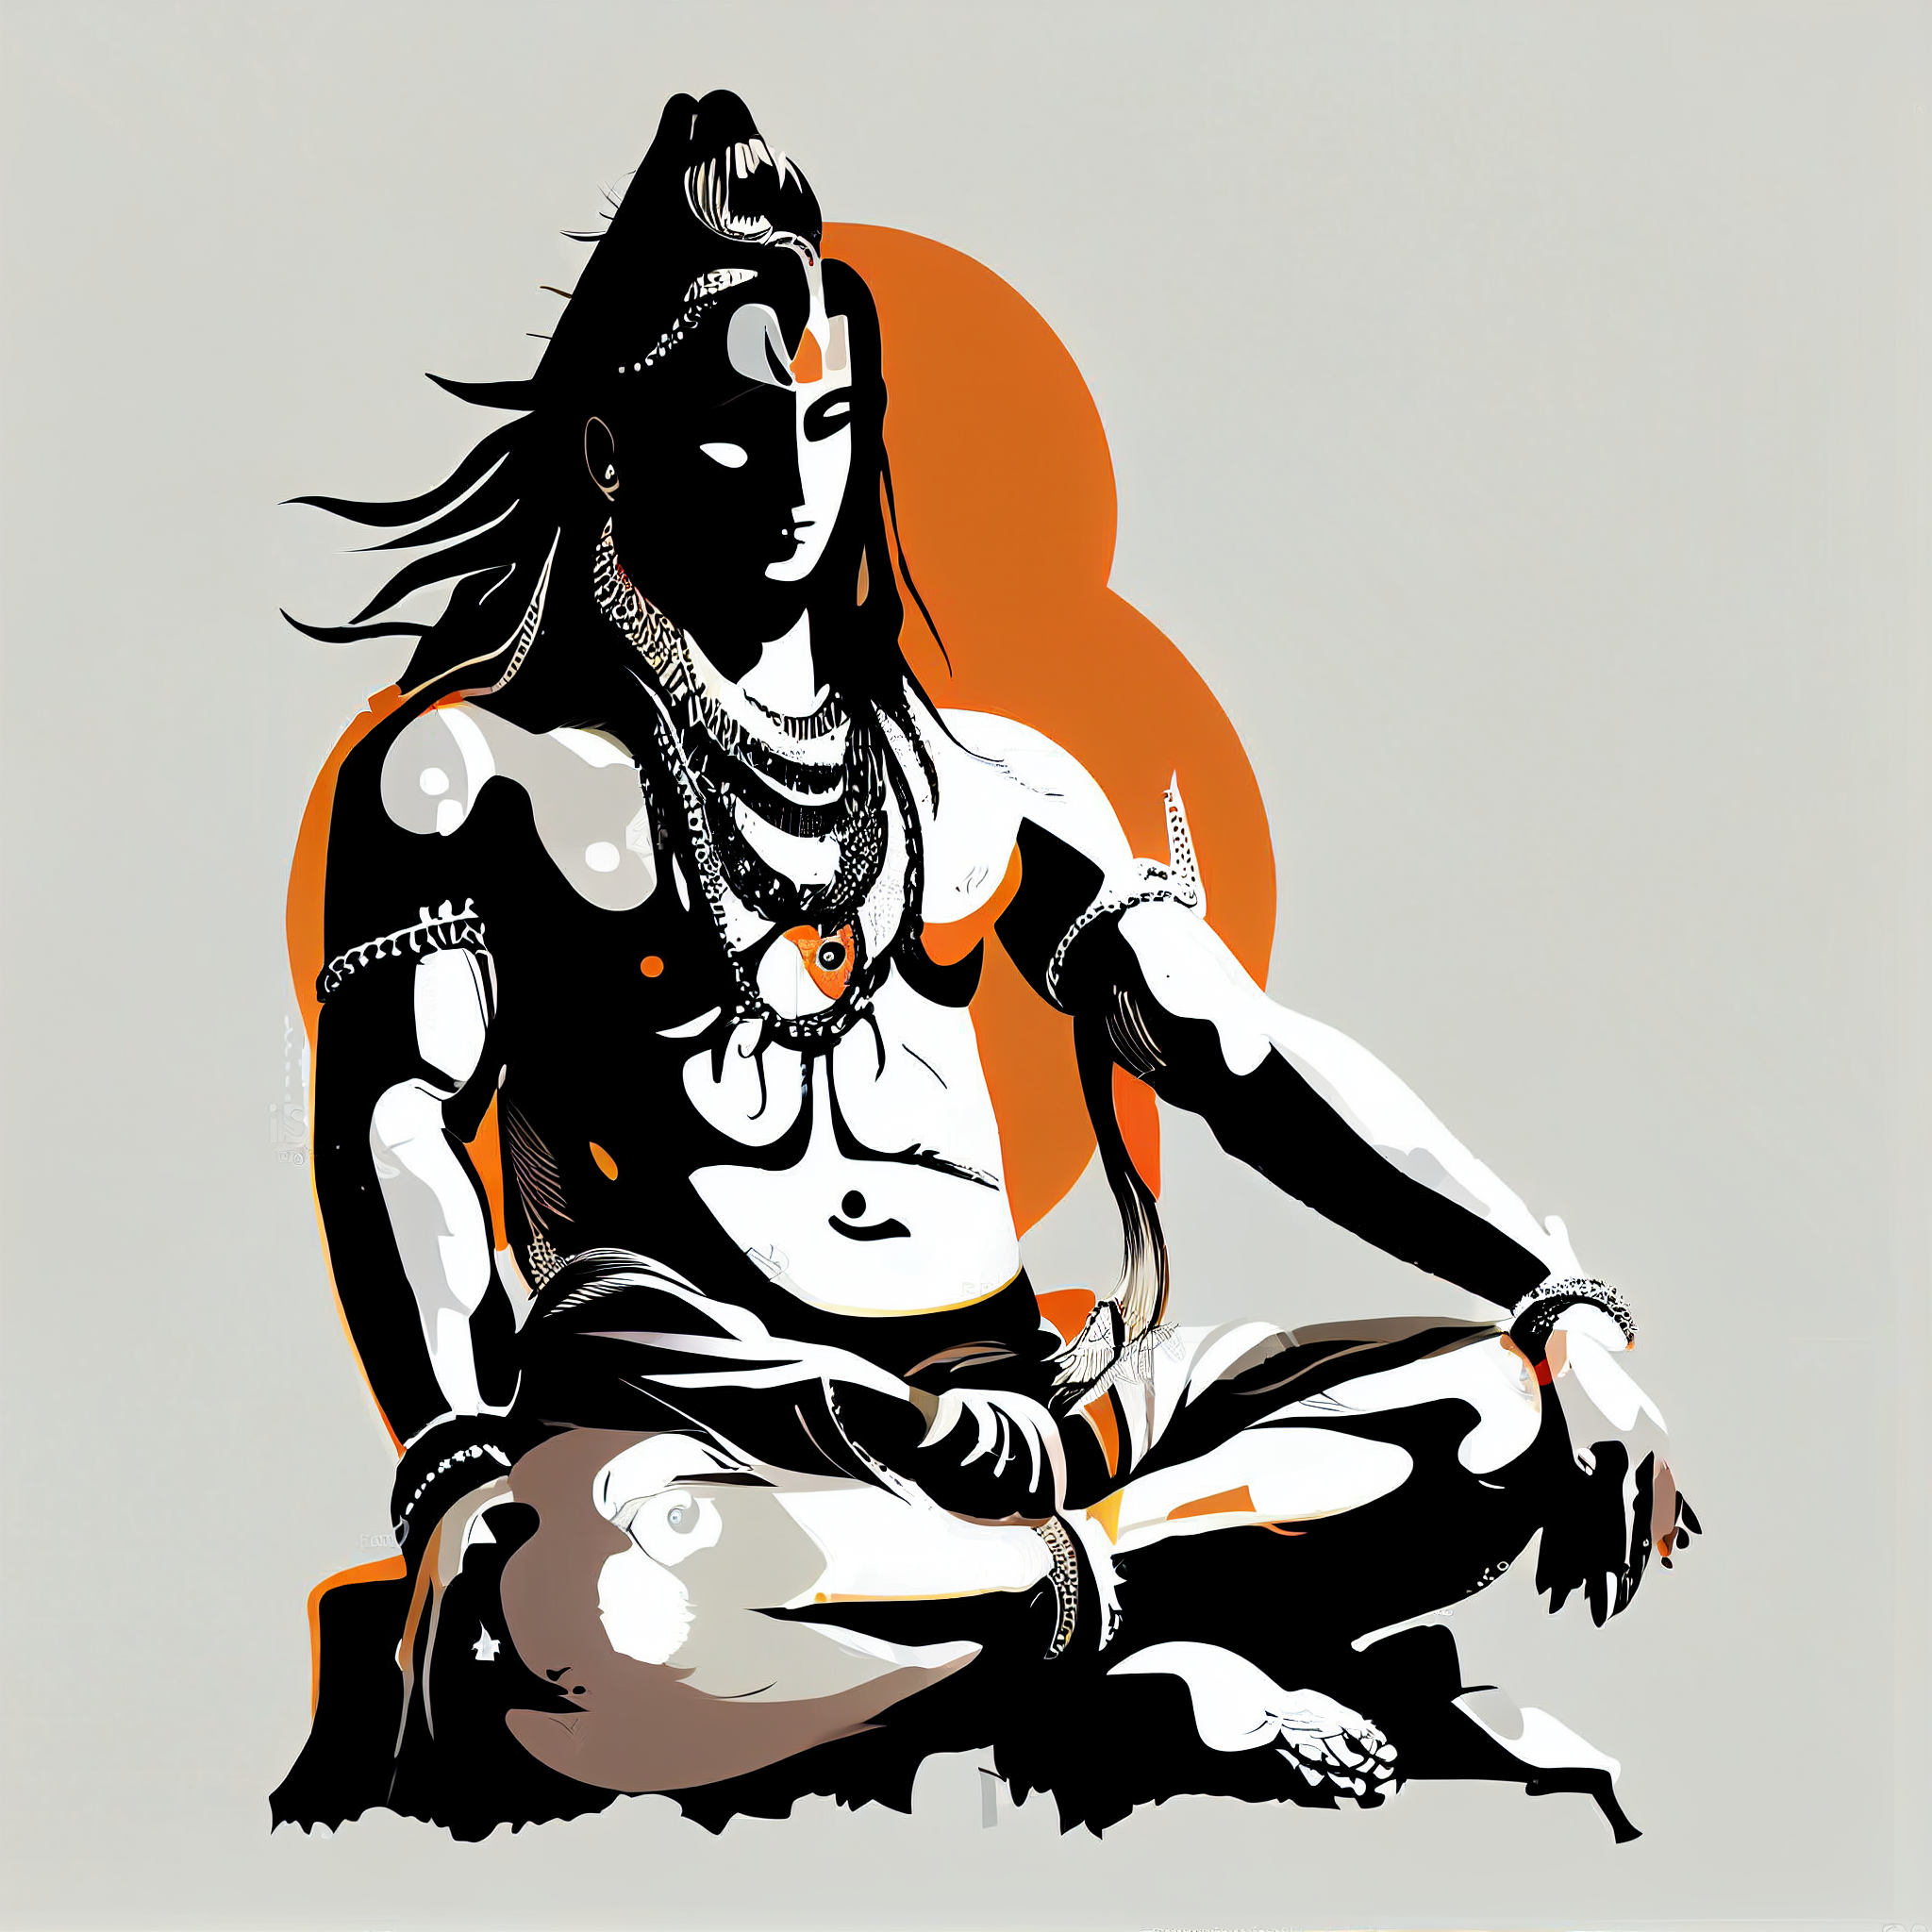 "Meditative Tranquility: Abstract Painting Print of Lord Shiva Perfect for Home, Living Room & Office Decor"